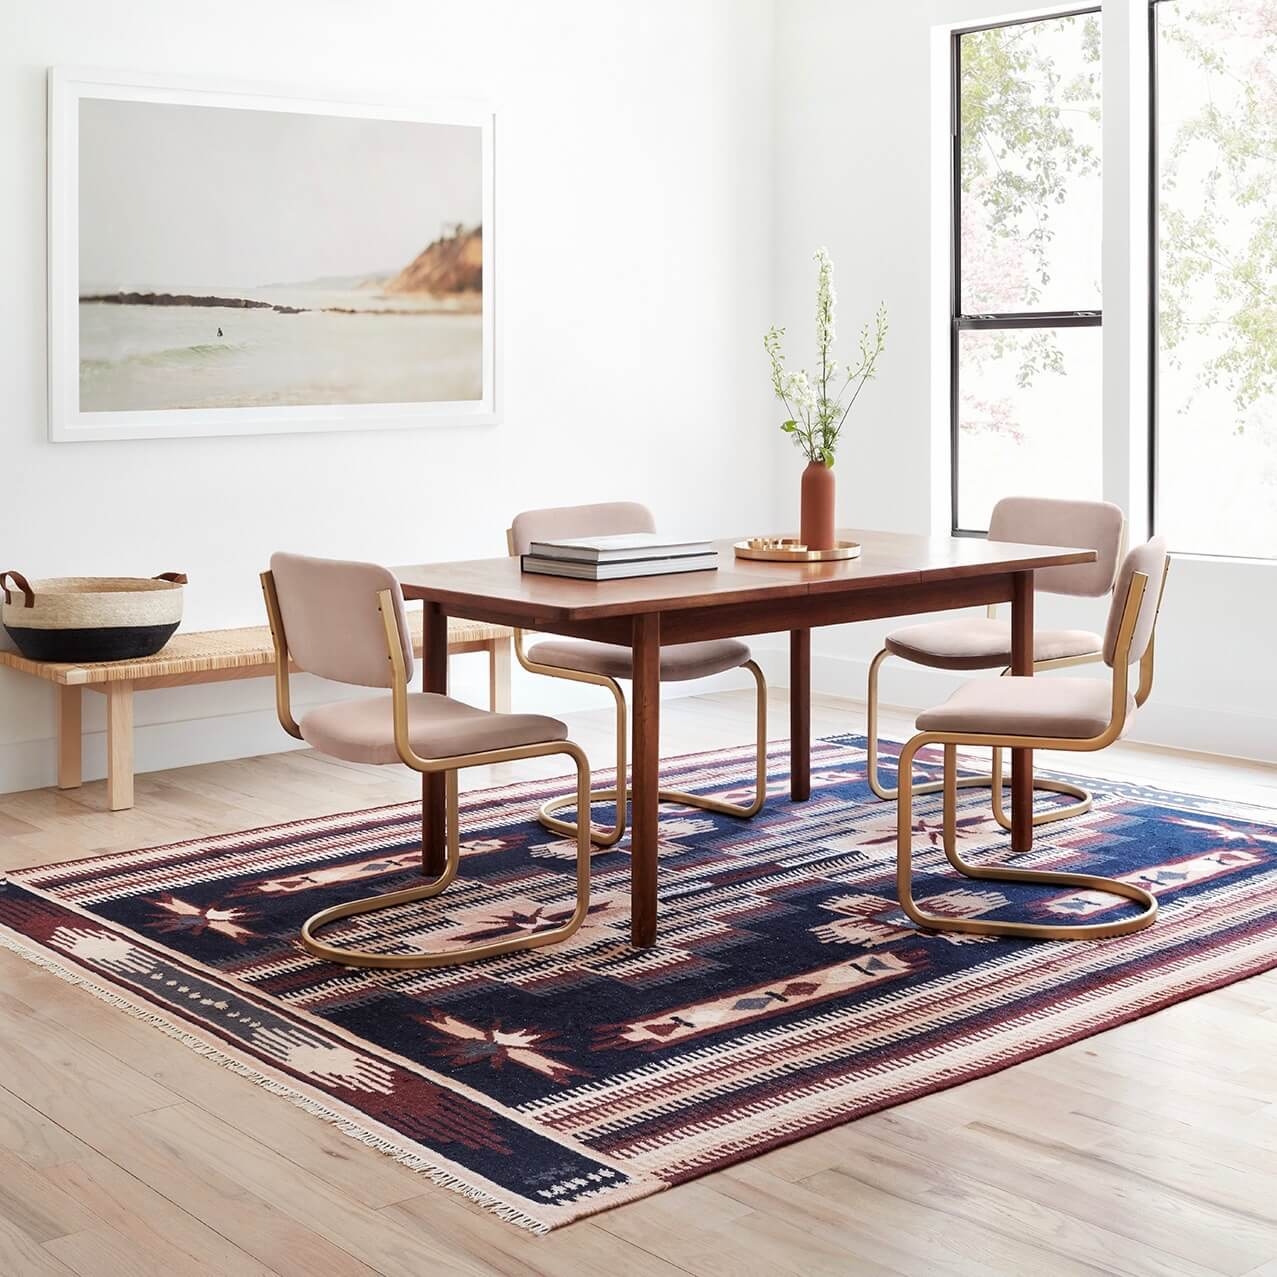 The Citizenry Keya Handwoven Area Rug | 5' x 8' | Made You Blush - Image 1